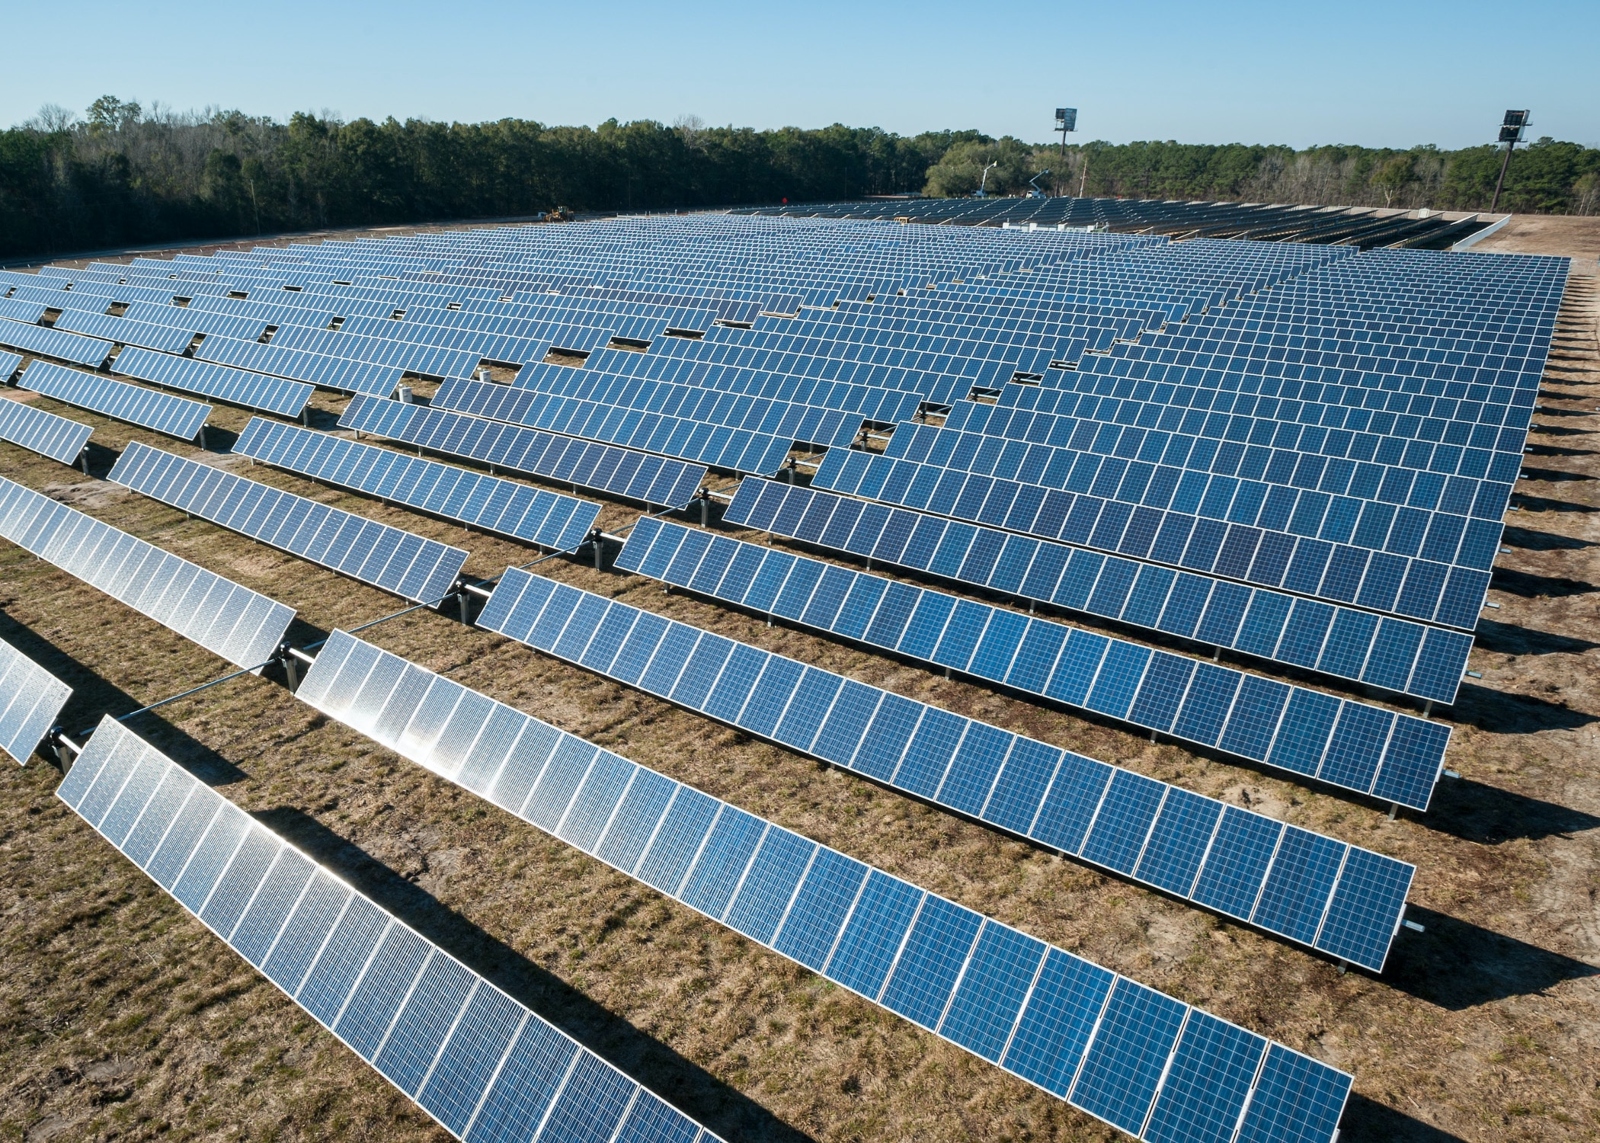 A field of black solar panels stretches to the edge of a forest.